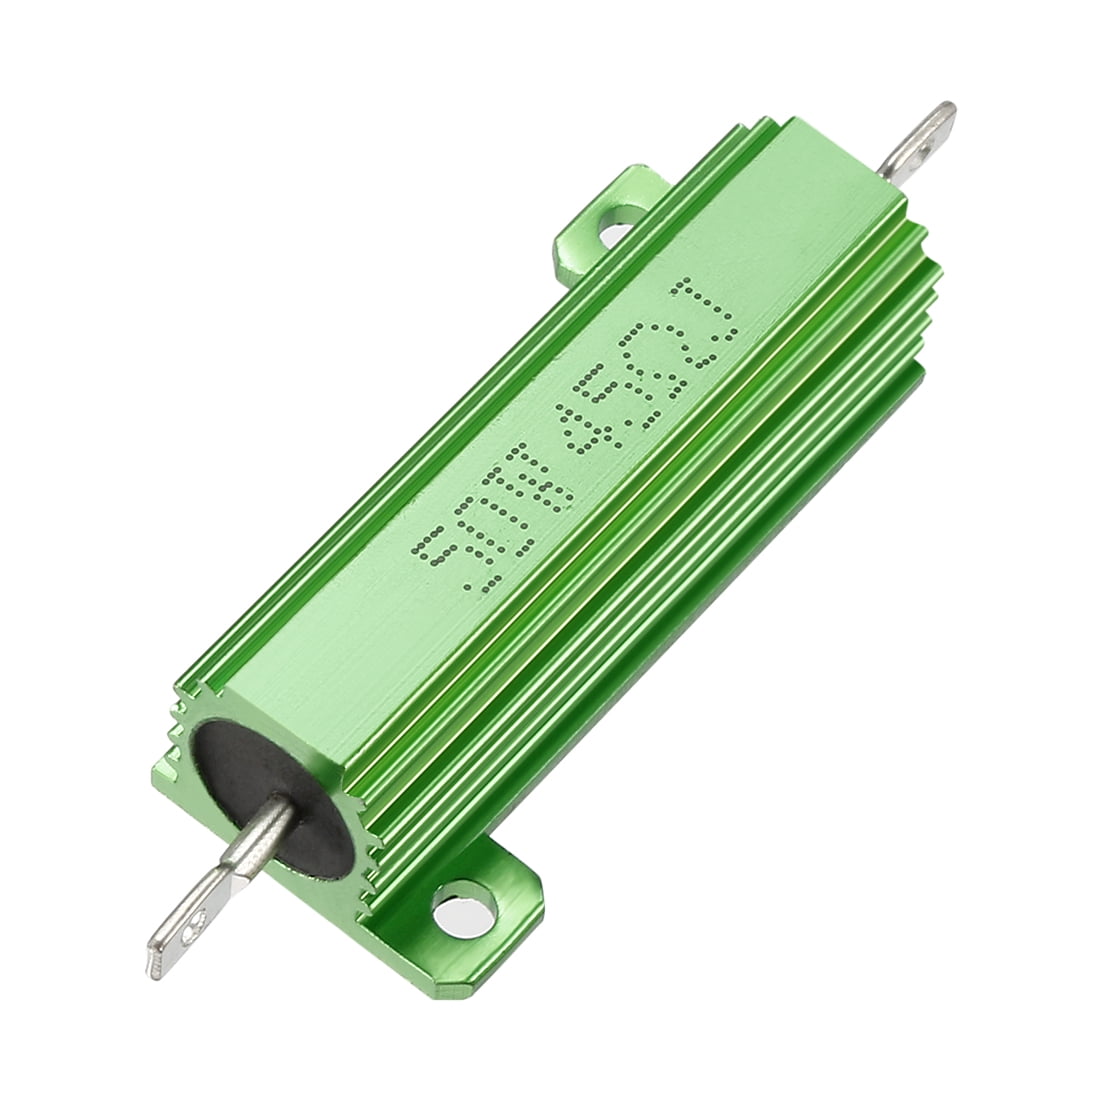 sourcing map 25W 25 Ohm 5% Aluminum Housing Resistor Screw Tap Chassis Mounted Aluminum Case Wirewound Resistor Load Resistor Green Tone 5 Pcs